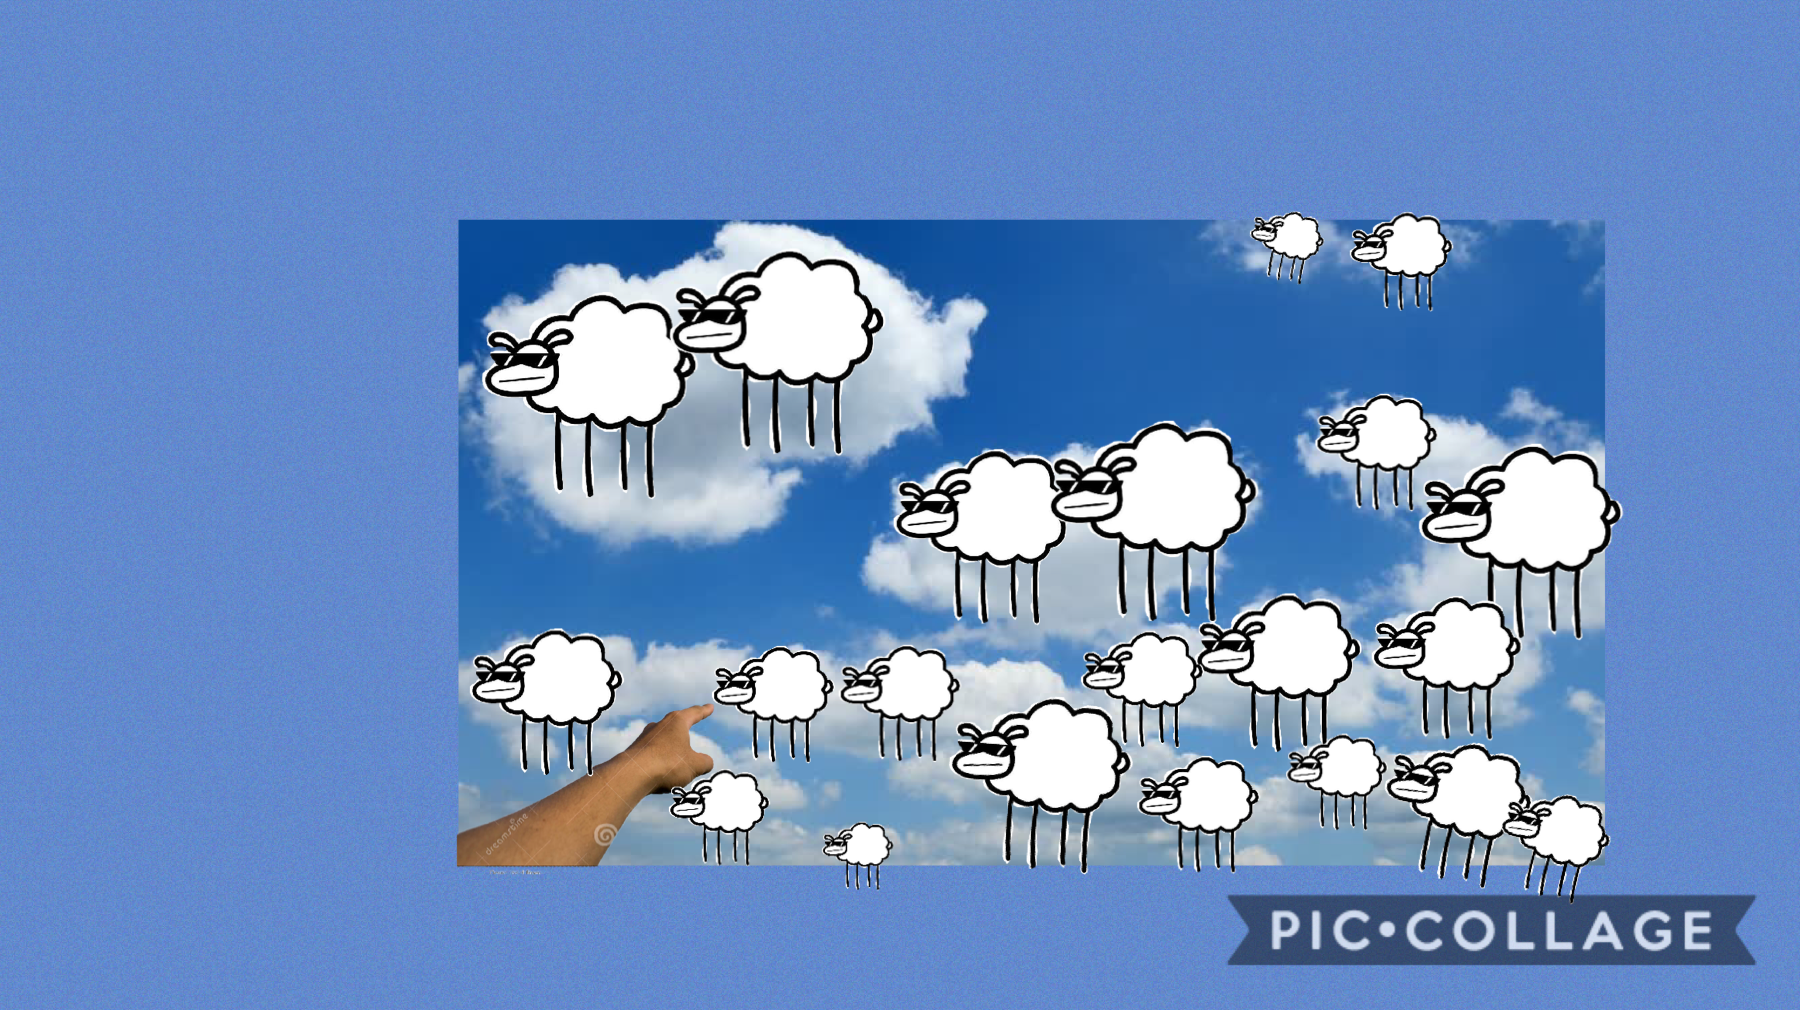 The 2nd part the the giant flying sheep. This was too hard. Trust me